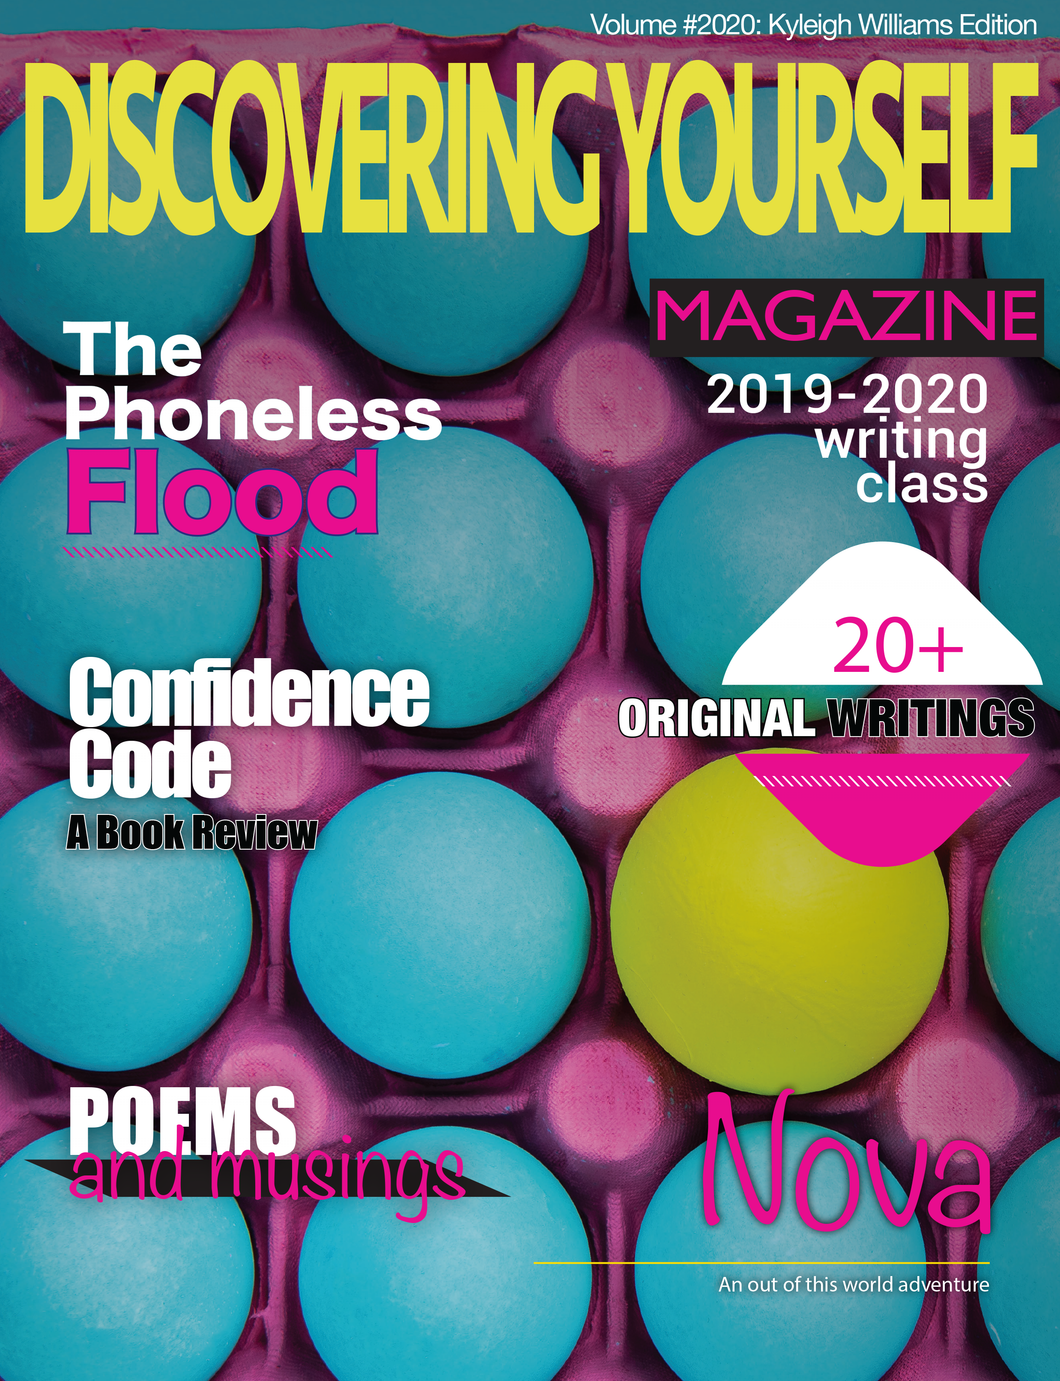 Discovering Yourself Magazine: Volume #2020: Kyleigh Williams Edition